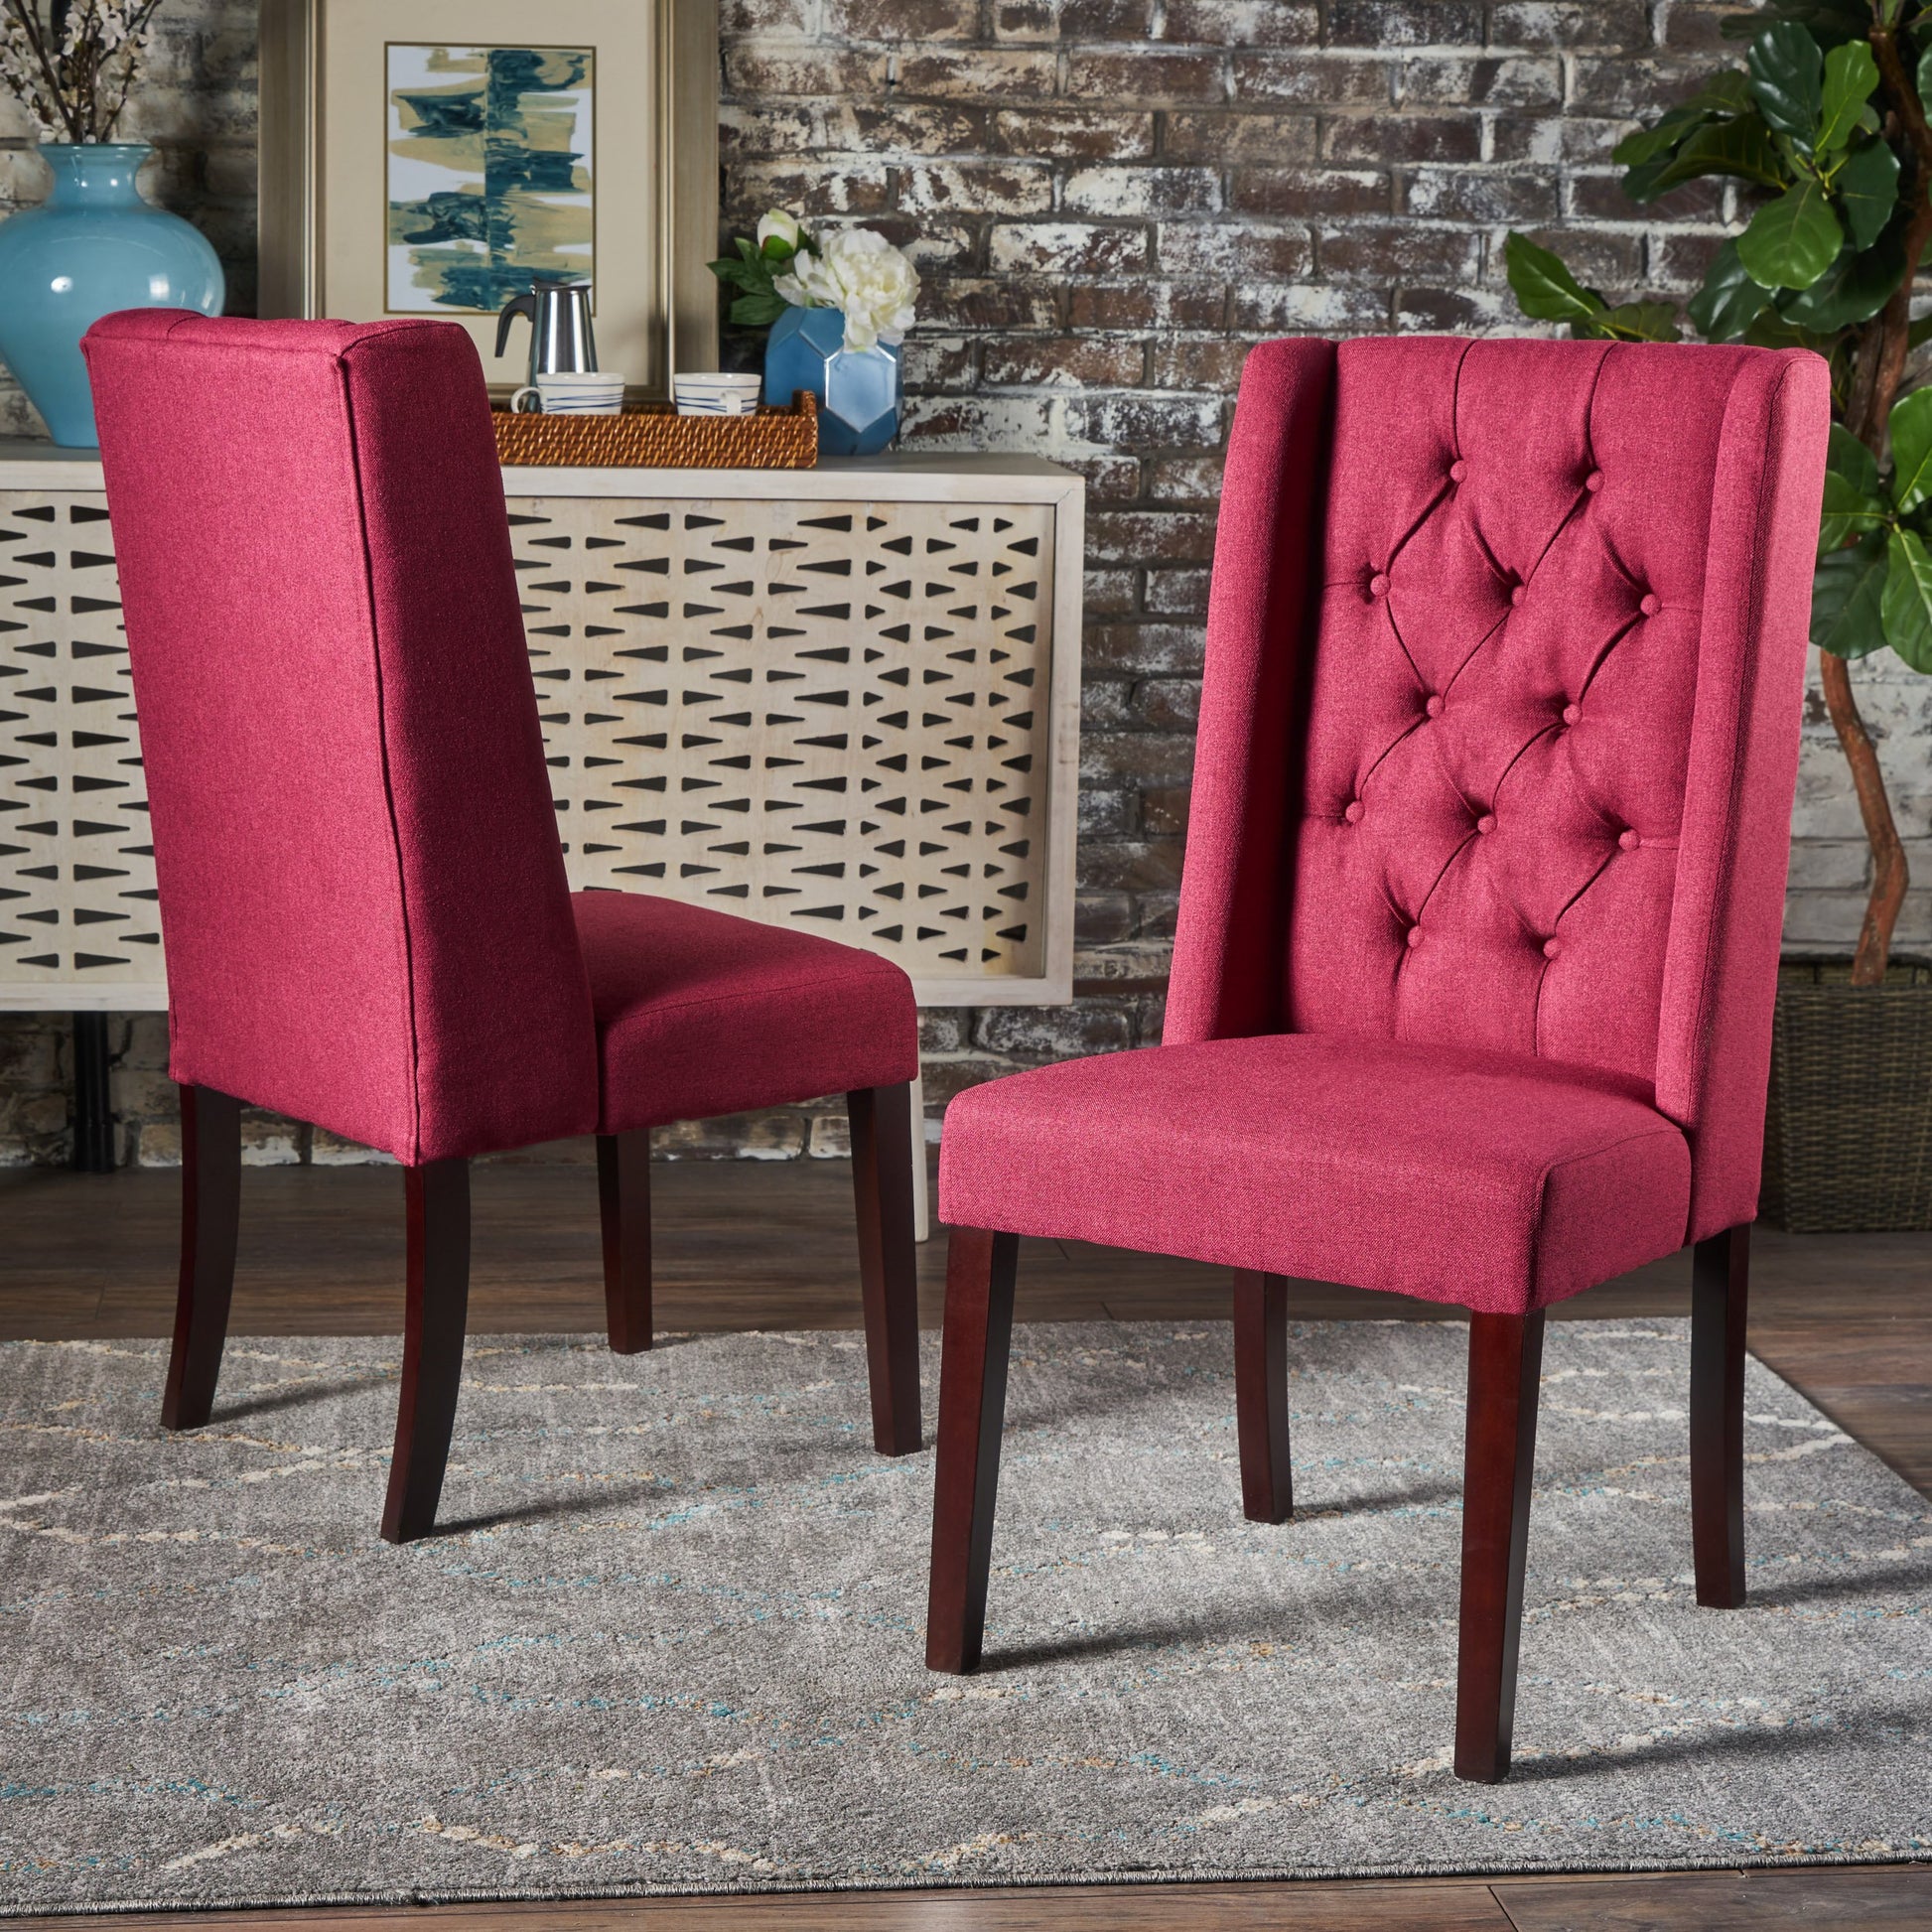  DAGONHIL Fabric Dining Chairs Set of 2 Tufted Dining